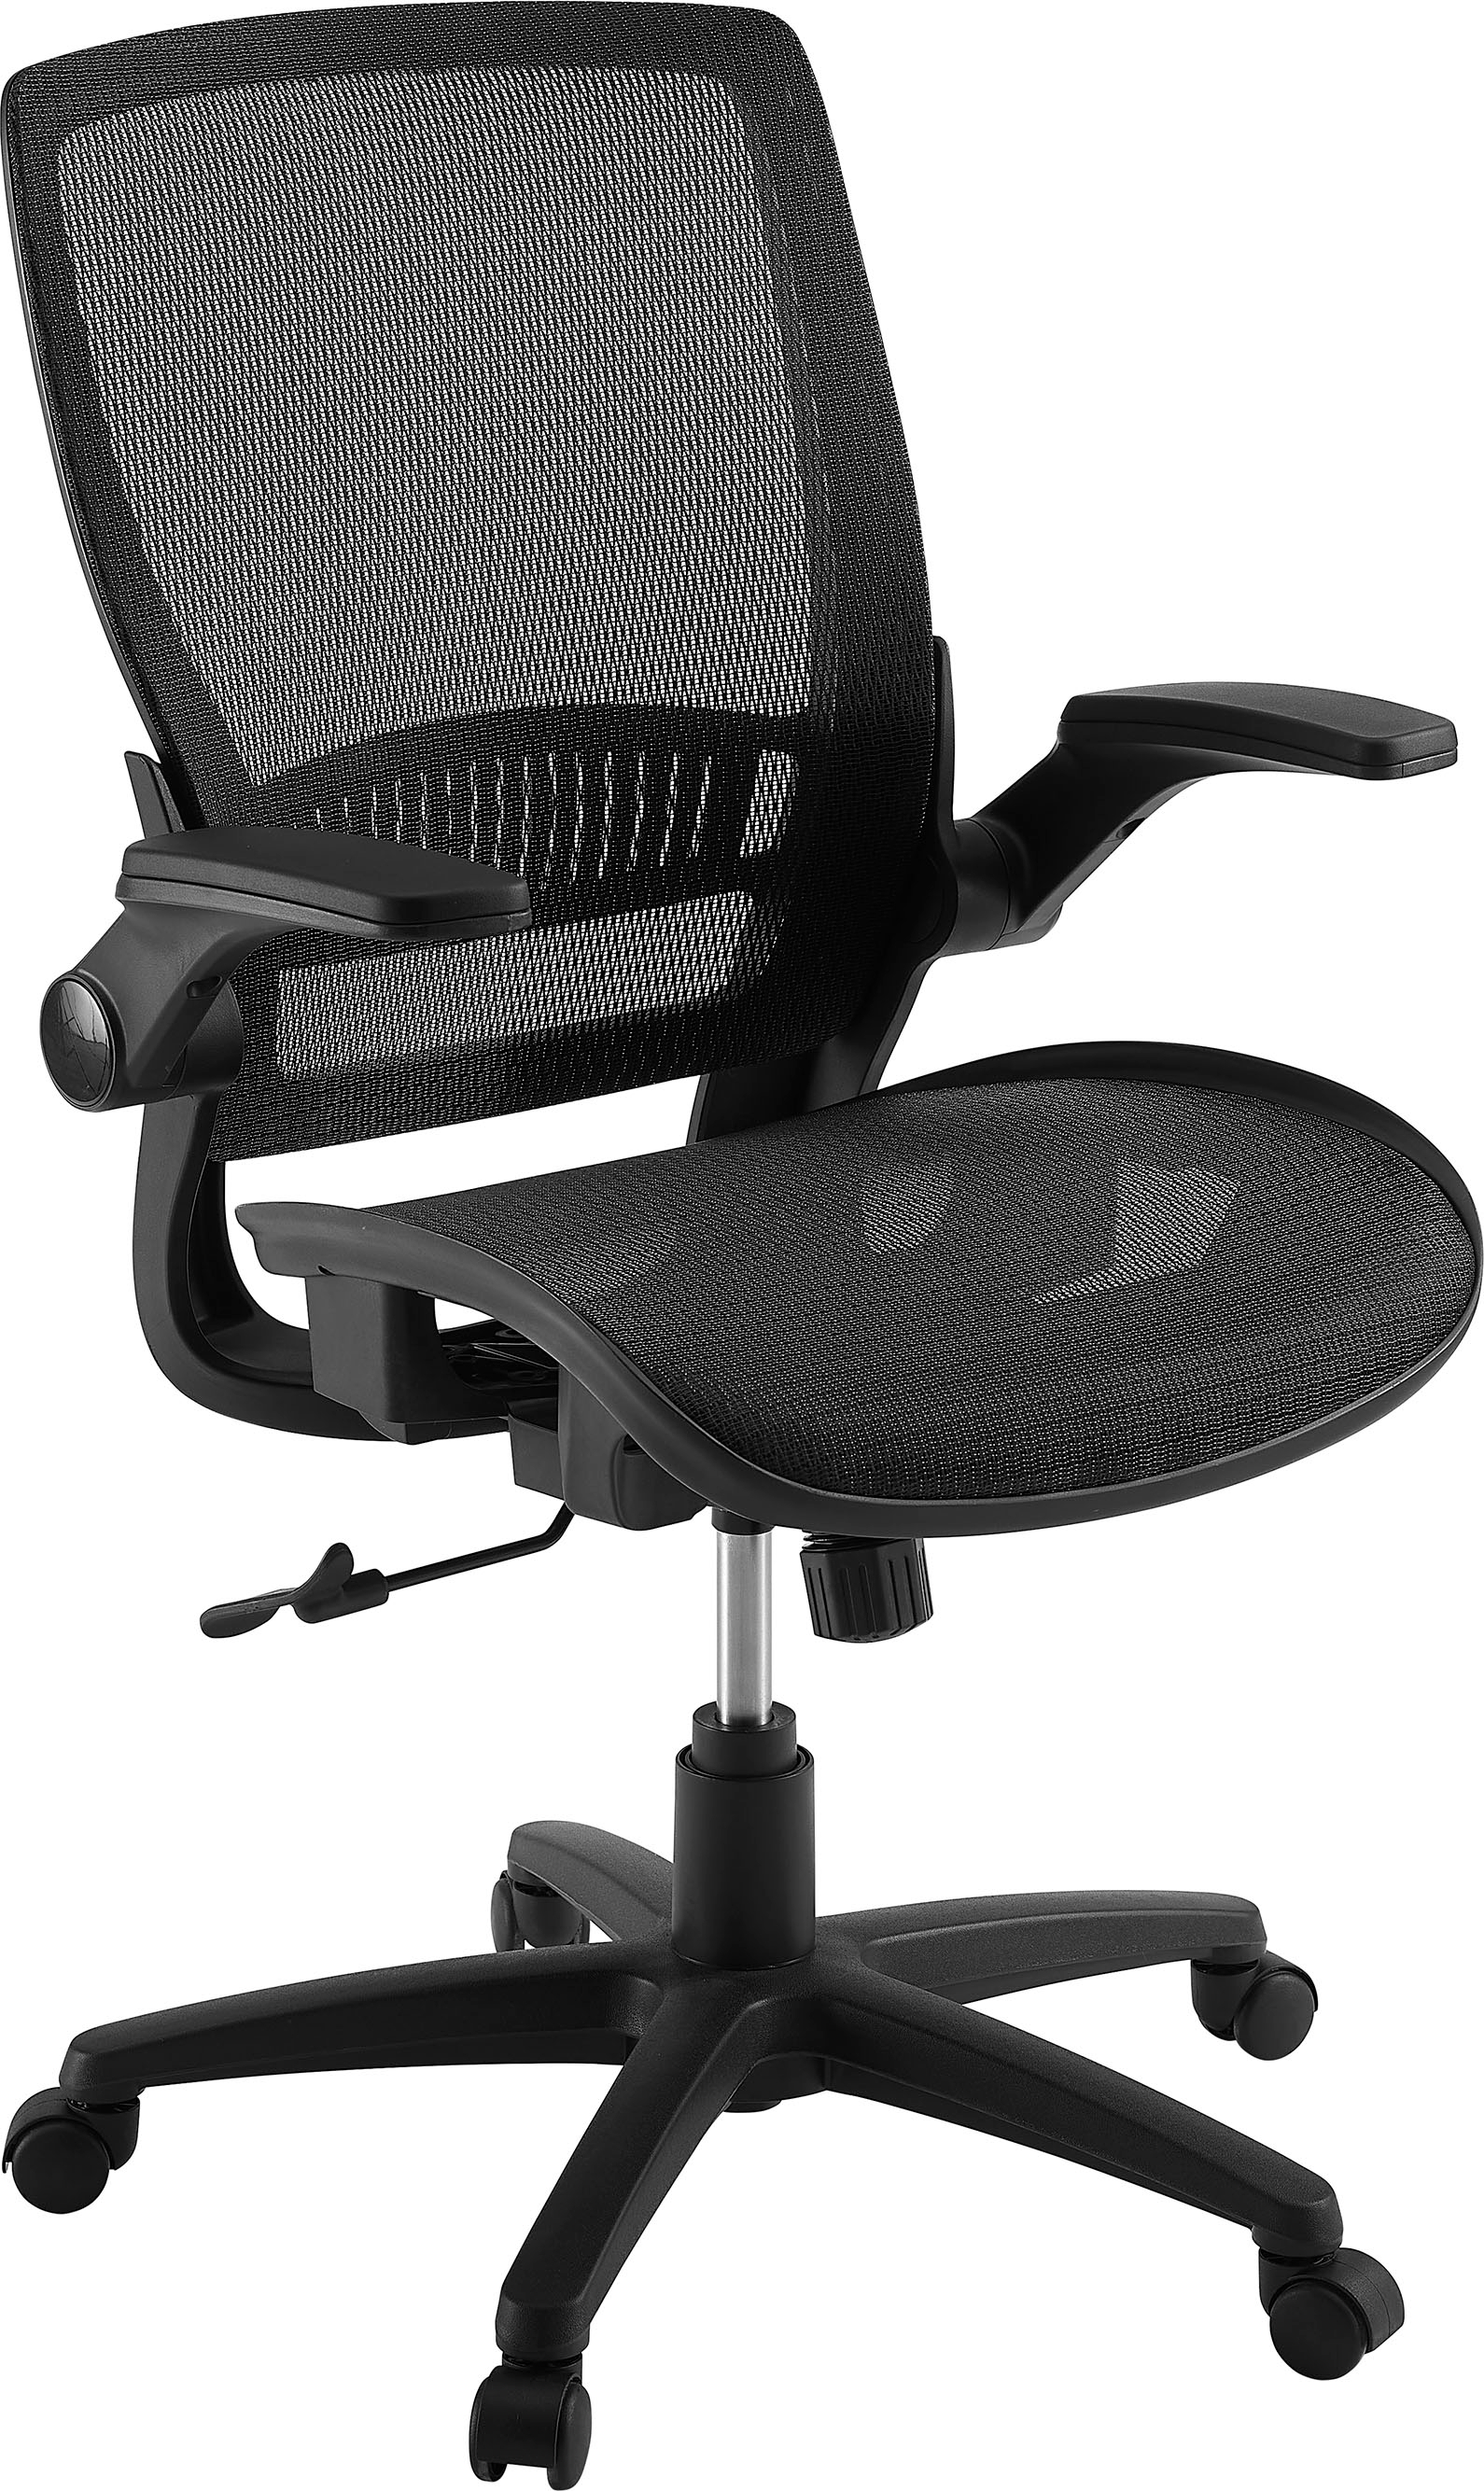 Angle View: Office Star Products - Mesh Chair - Black